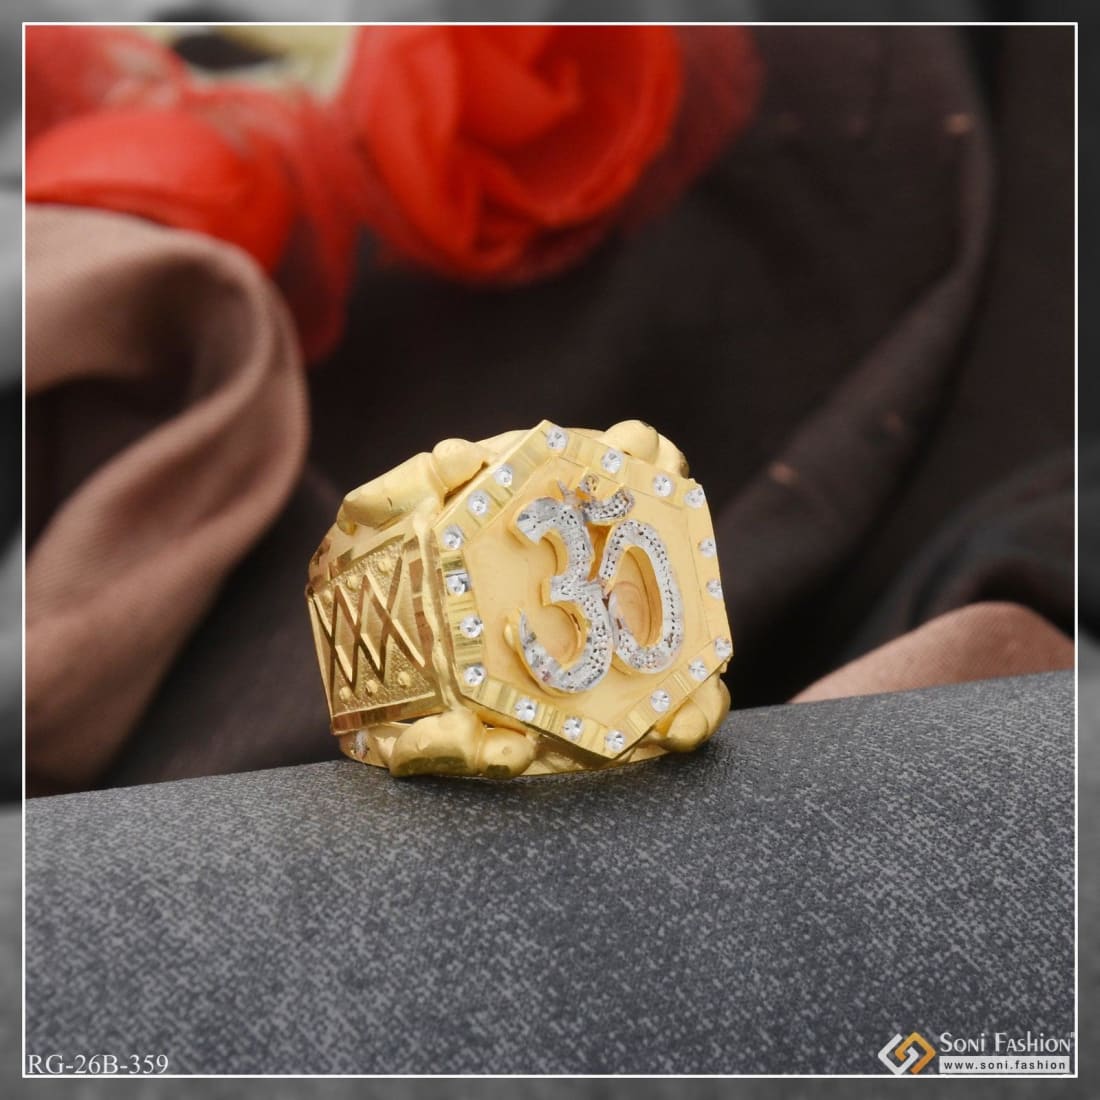 Om Ring - Etsy | Gold jewelry stores, Modern gold jewelry, Gold rings  fashion